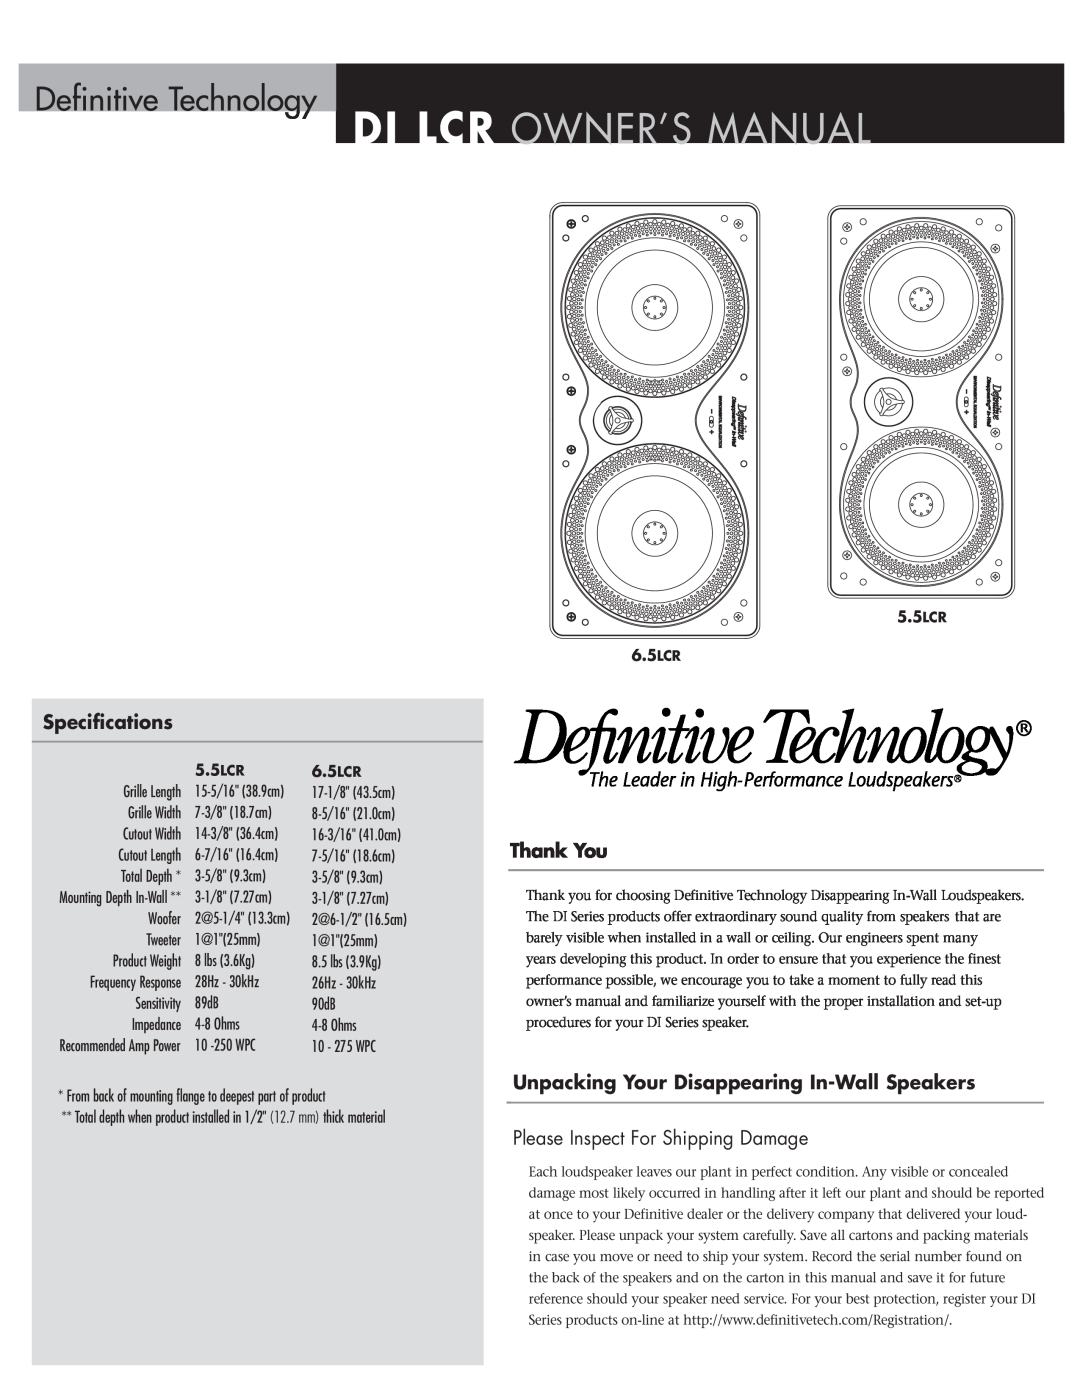 Definitive Technology owner manual Definitive Technology, Specifications, Thank You, 5.5LCR 6.5LCR 